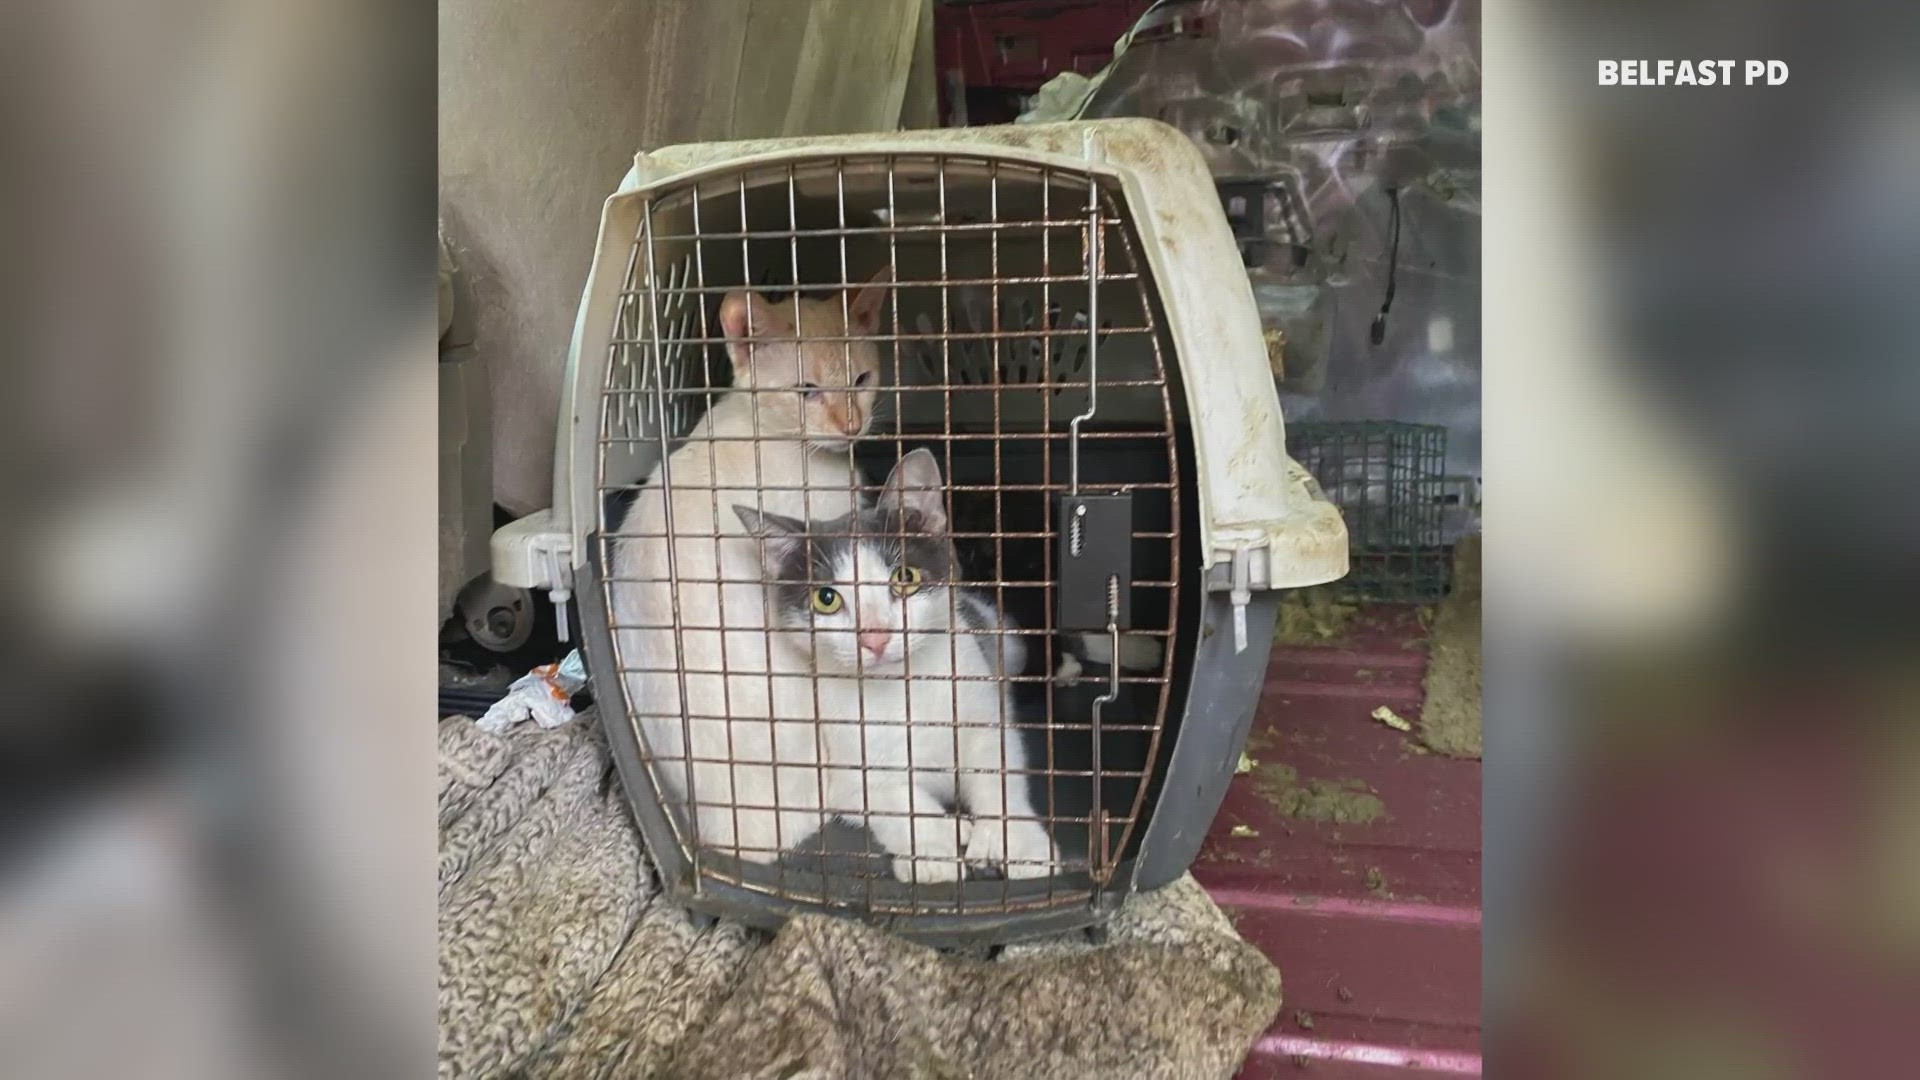 Police said 13 animals were seized during an investigation.